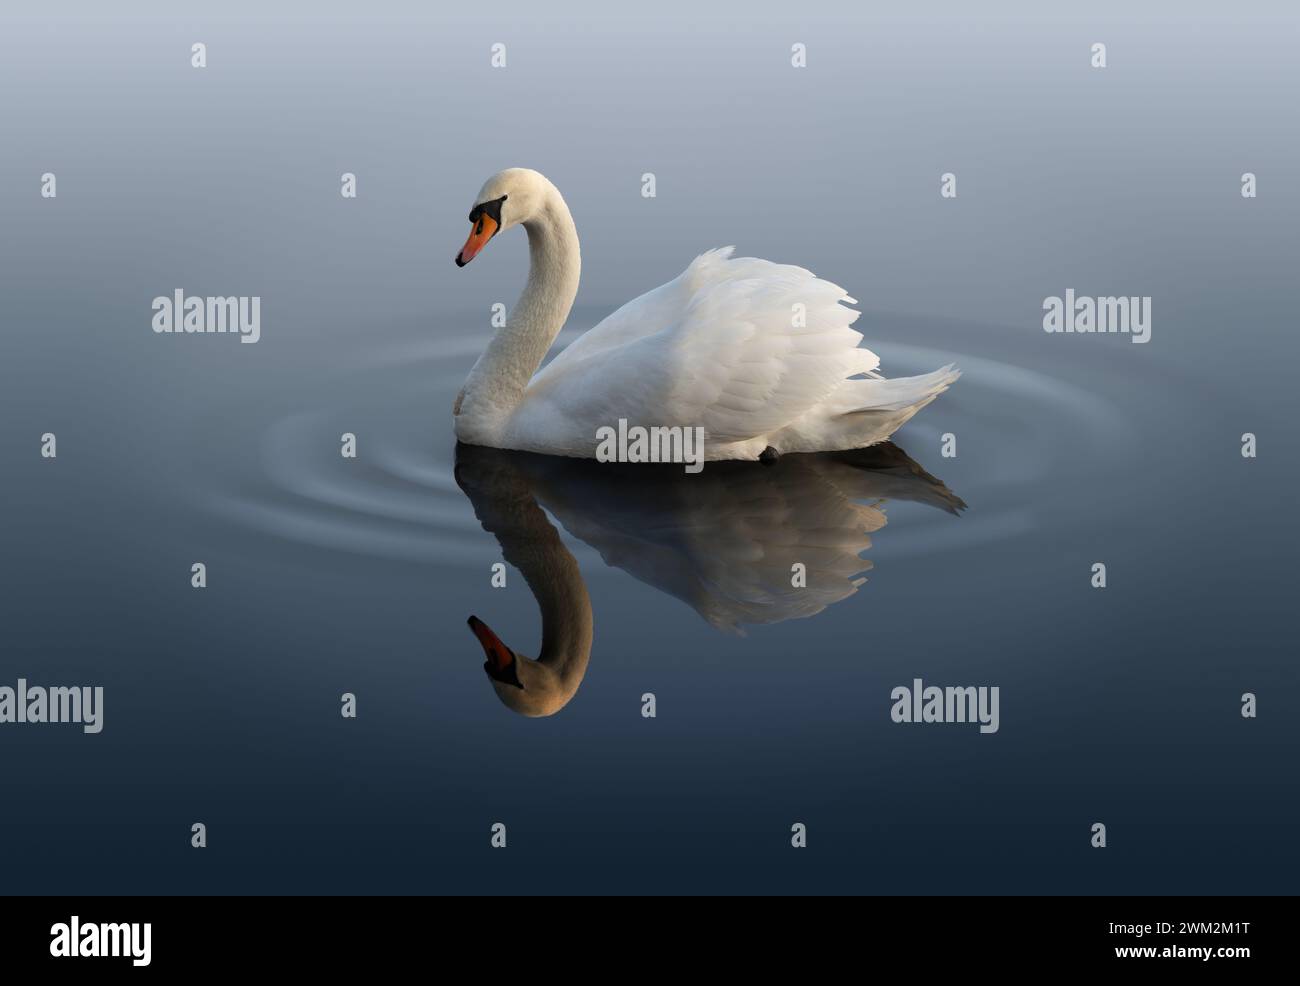 A mute swan swimming on a still pond Stock Photo